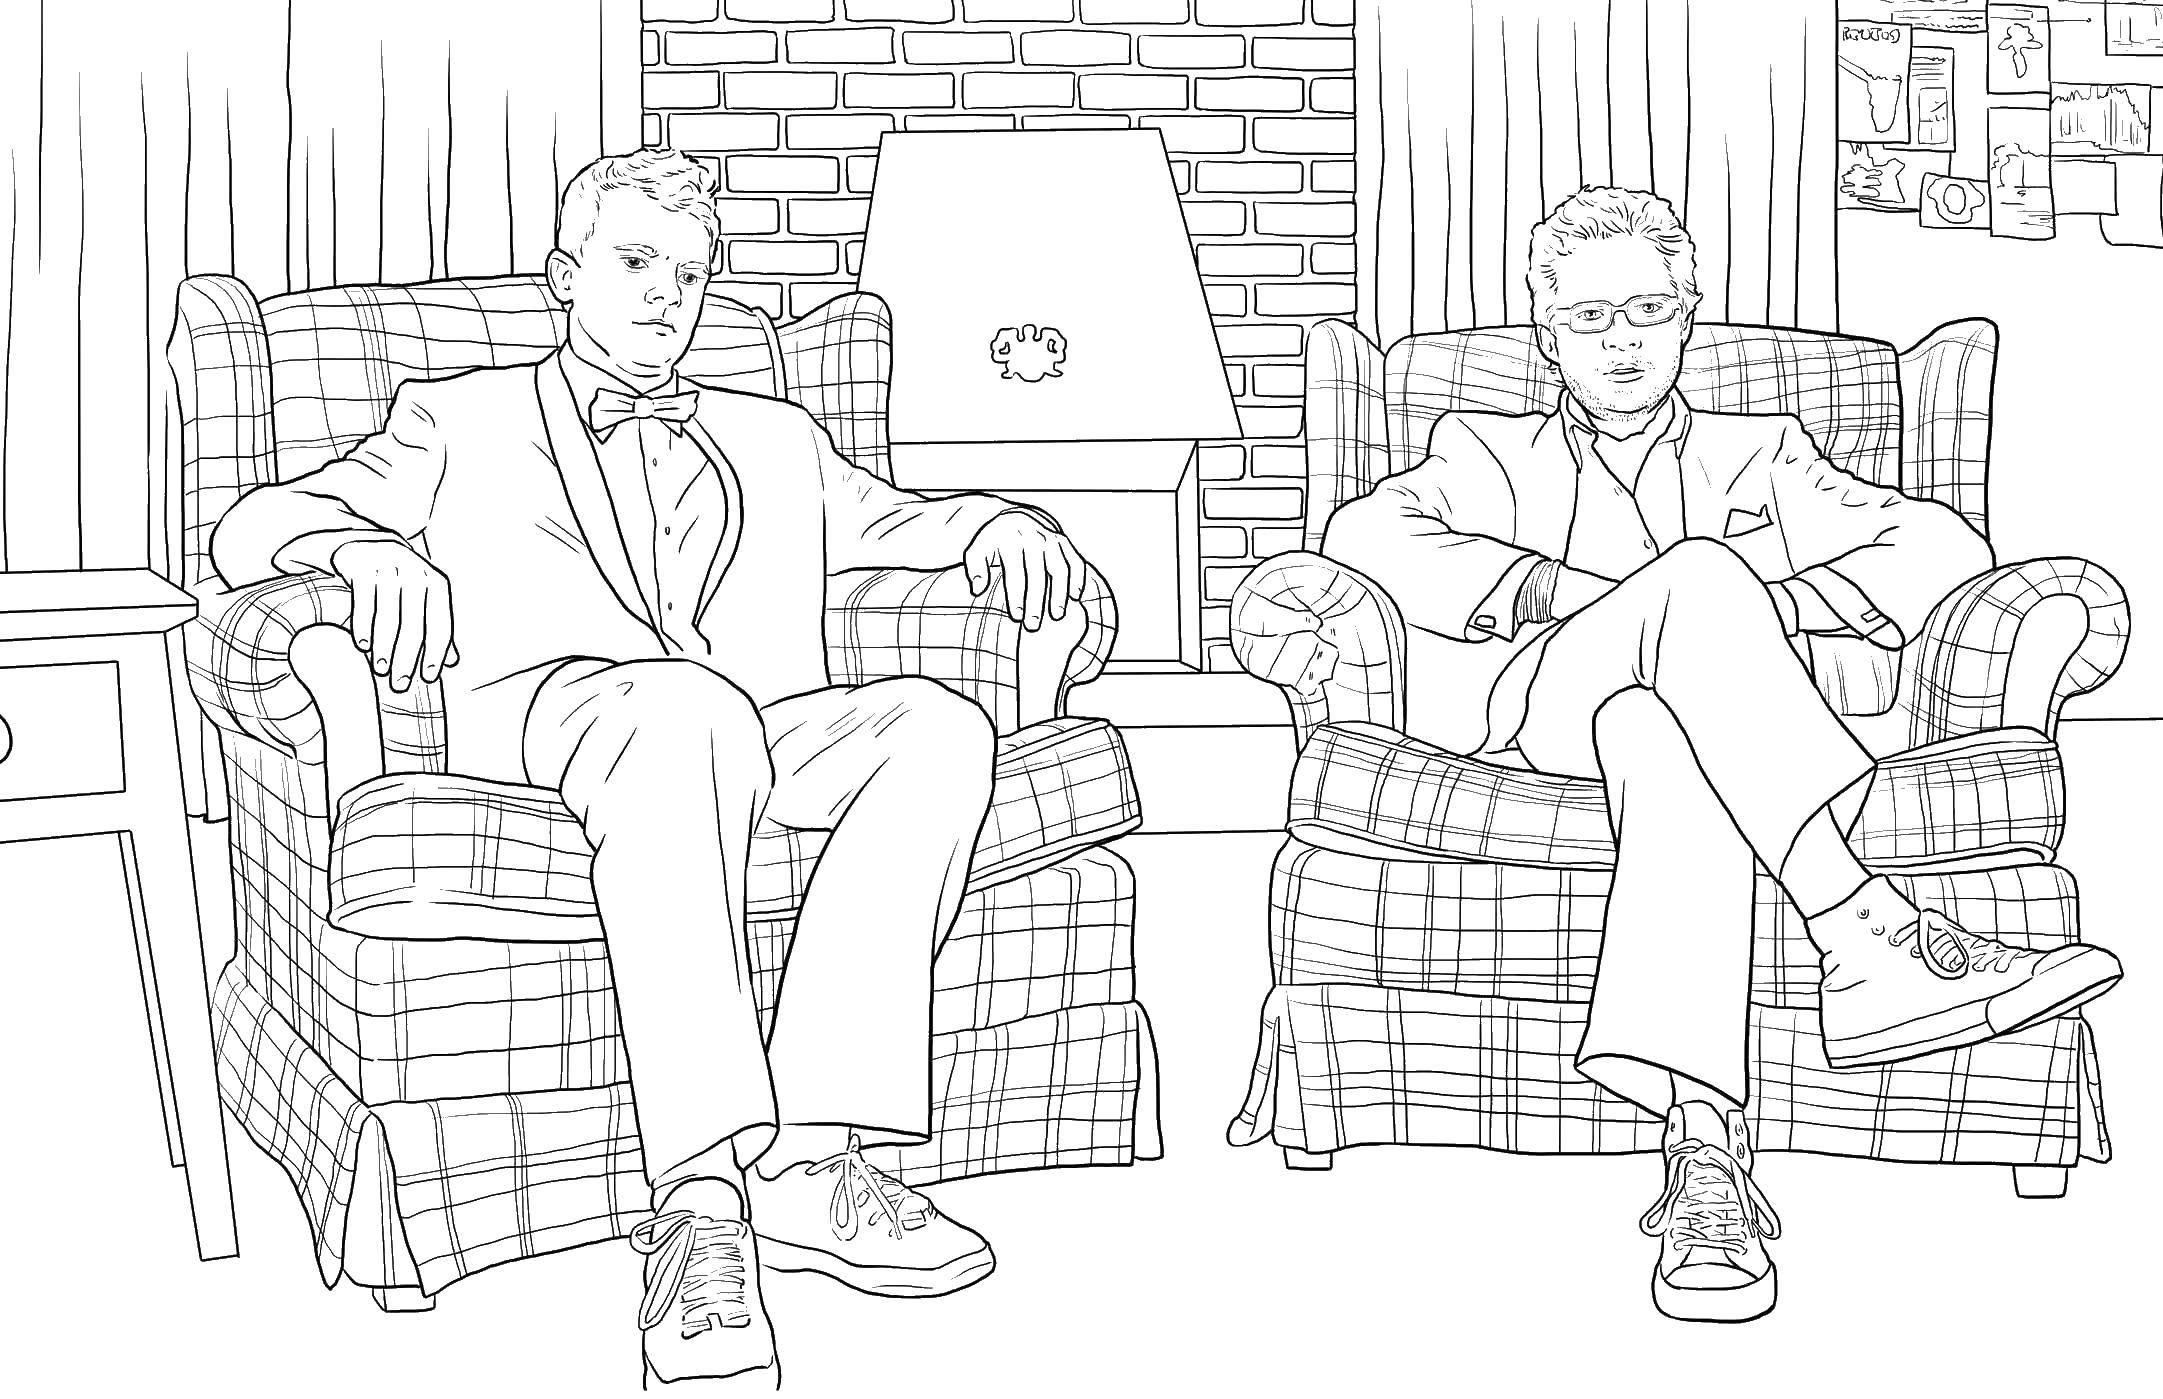 Coloring Men in chairs. Category living room . Tags:  living room, boys, chair.